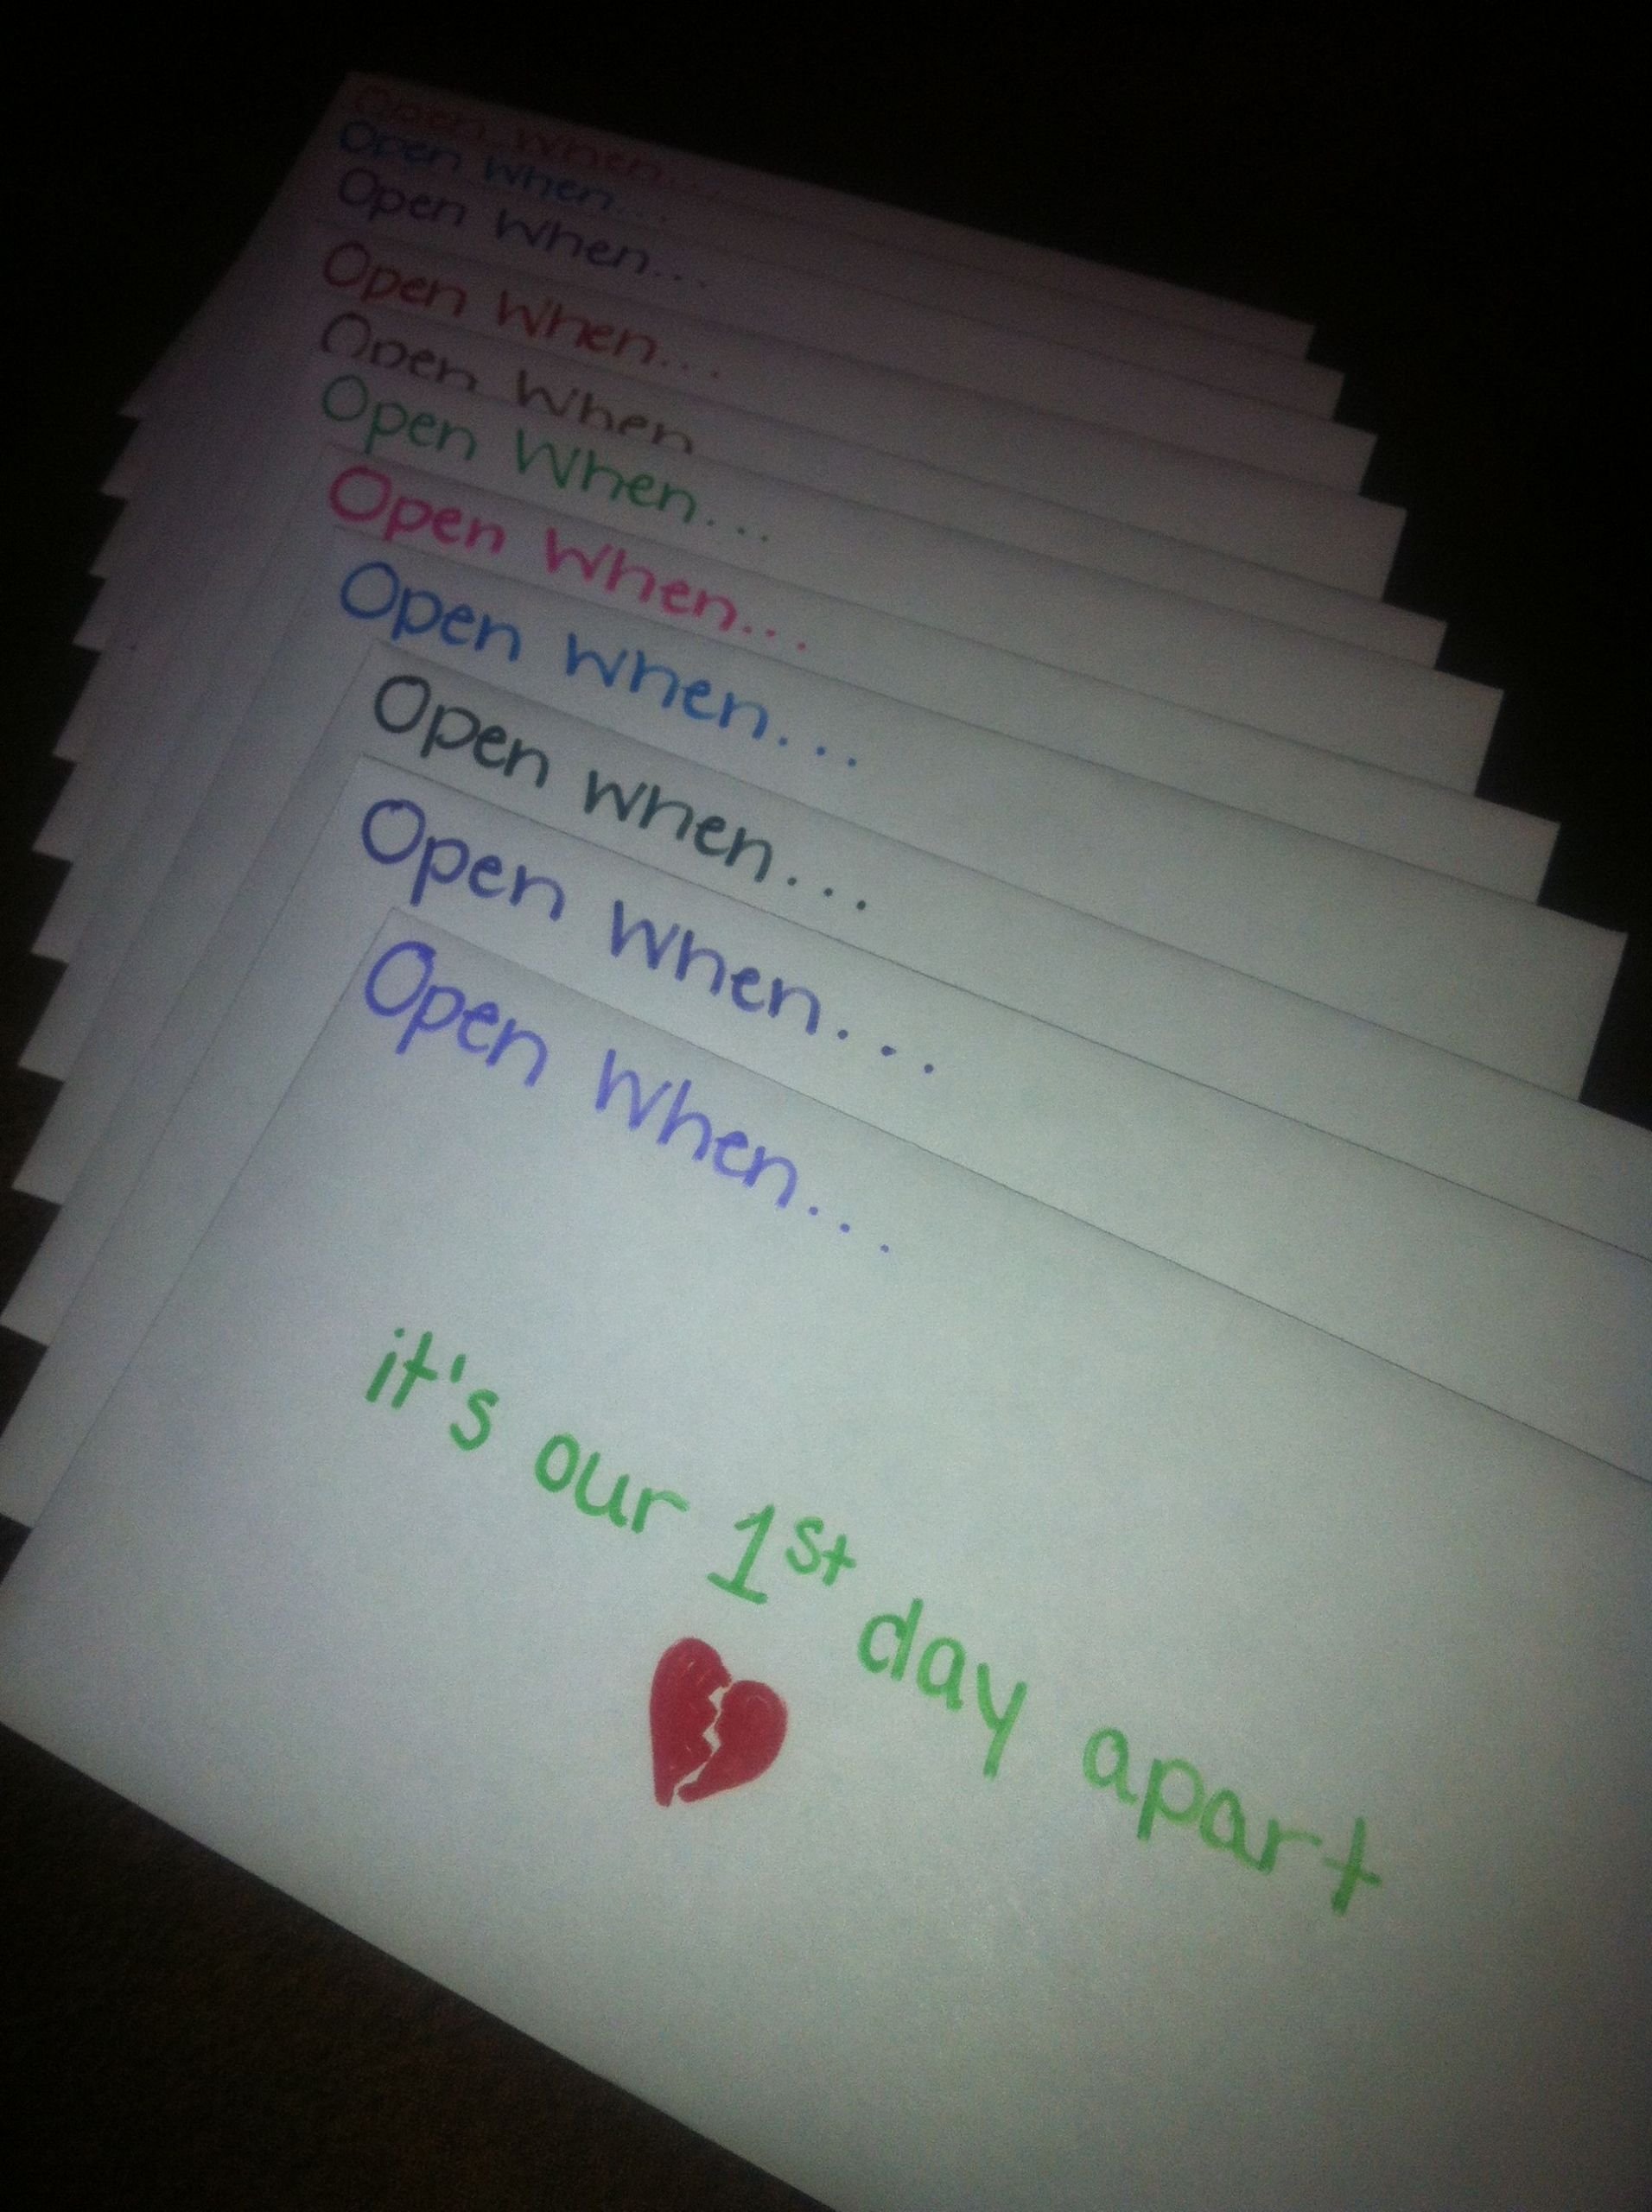 Boyfriend Leaving For College Gift Ideas
 "Open When" cards for my boyfriend when I go away to